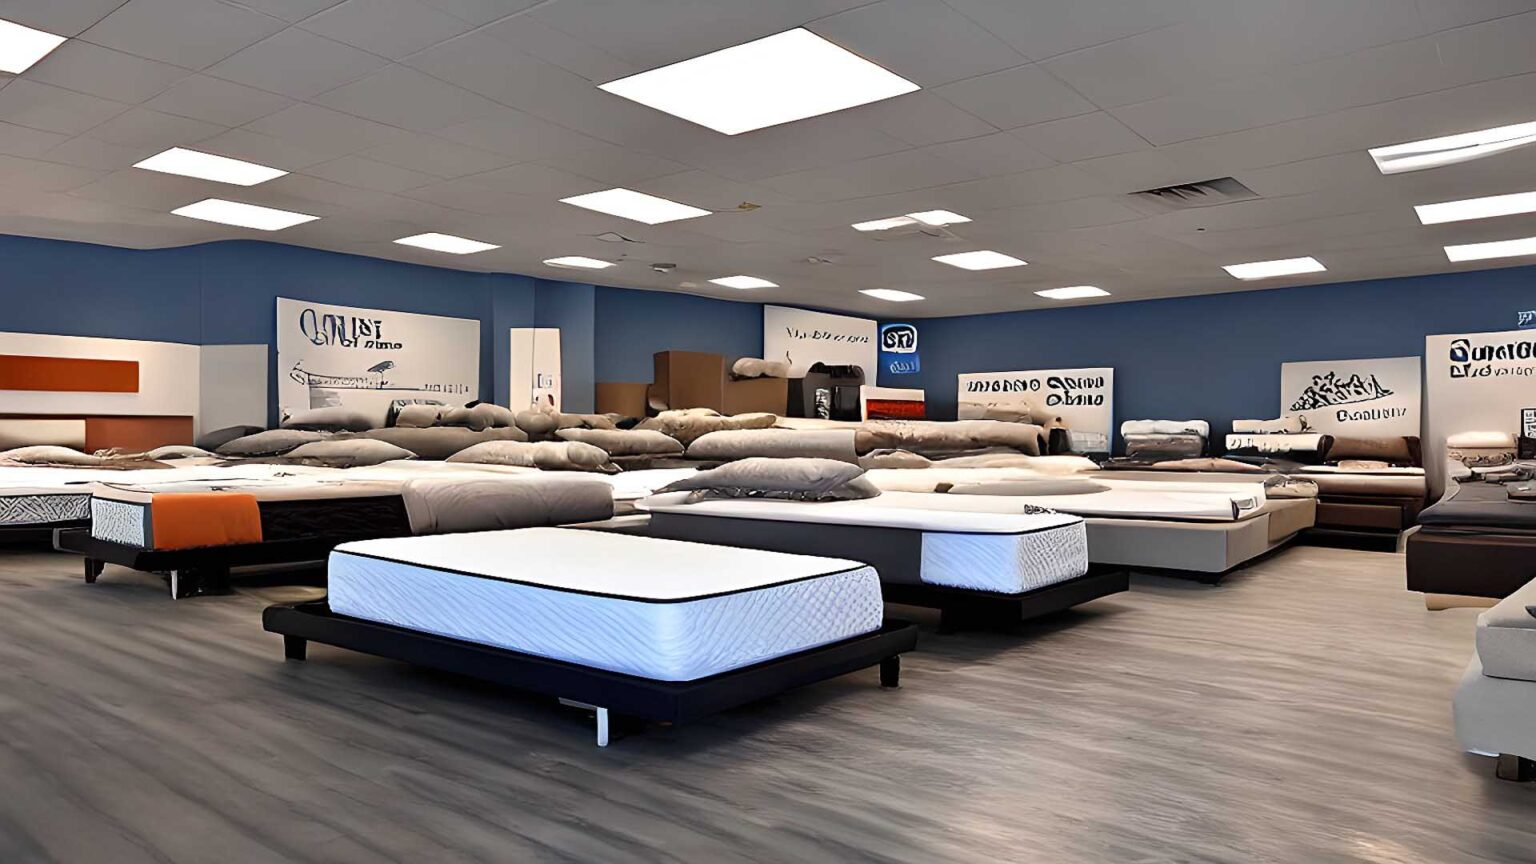 Mattress Stores, mattress dealers, and mattress retailers near me in Lompoc, CA